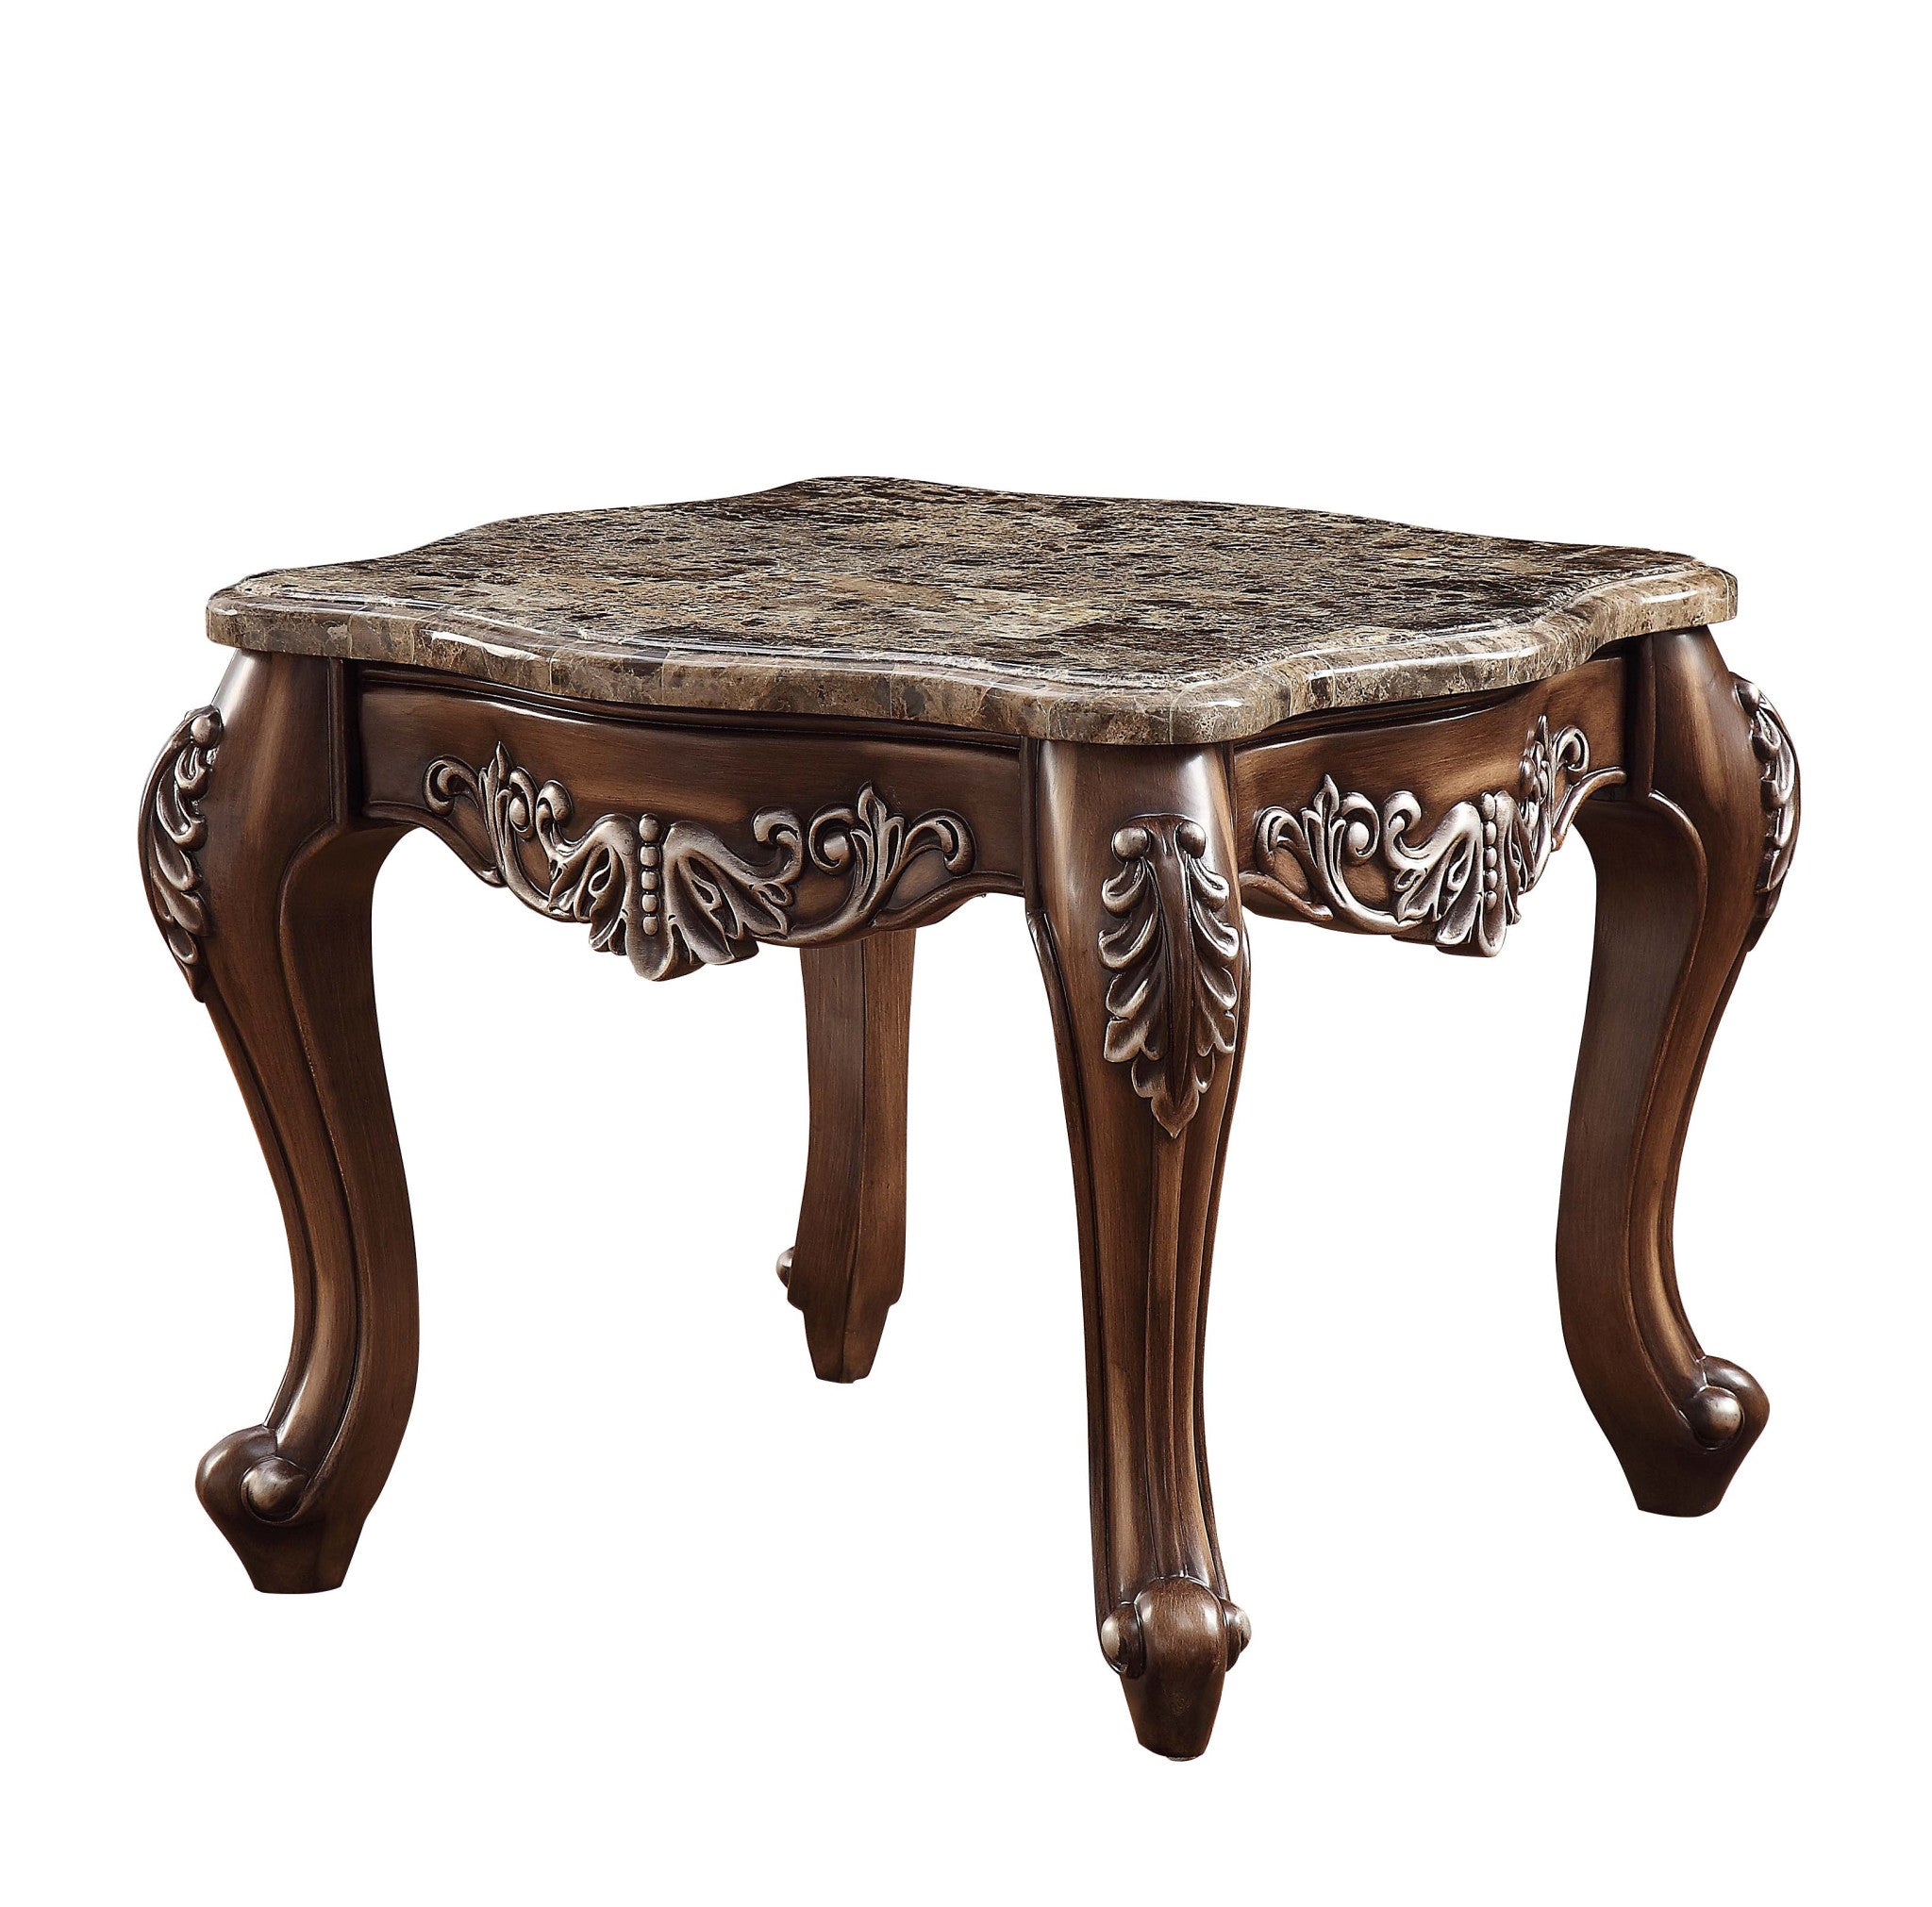 24" Antique Oak And Marble Square End Table